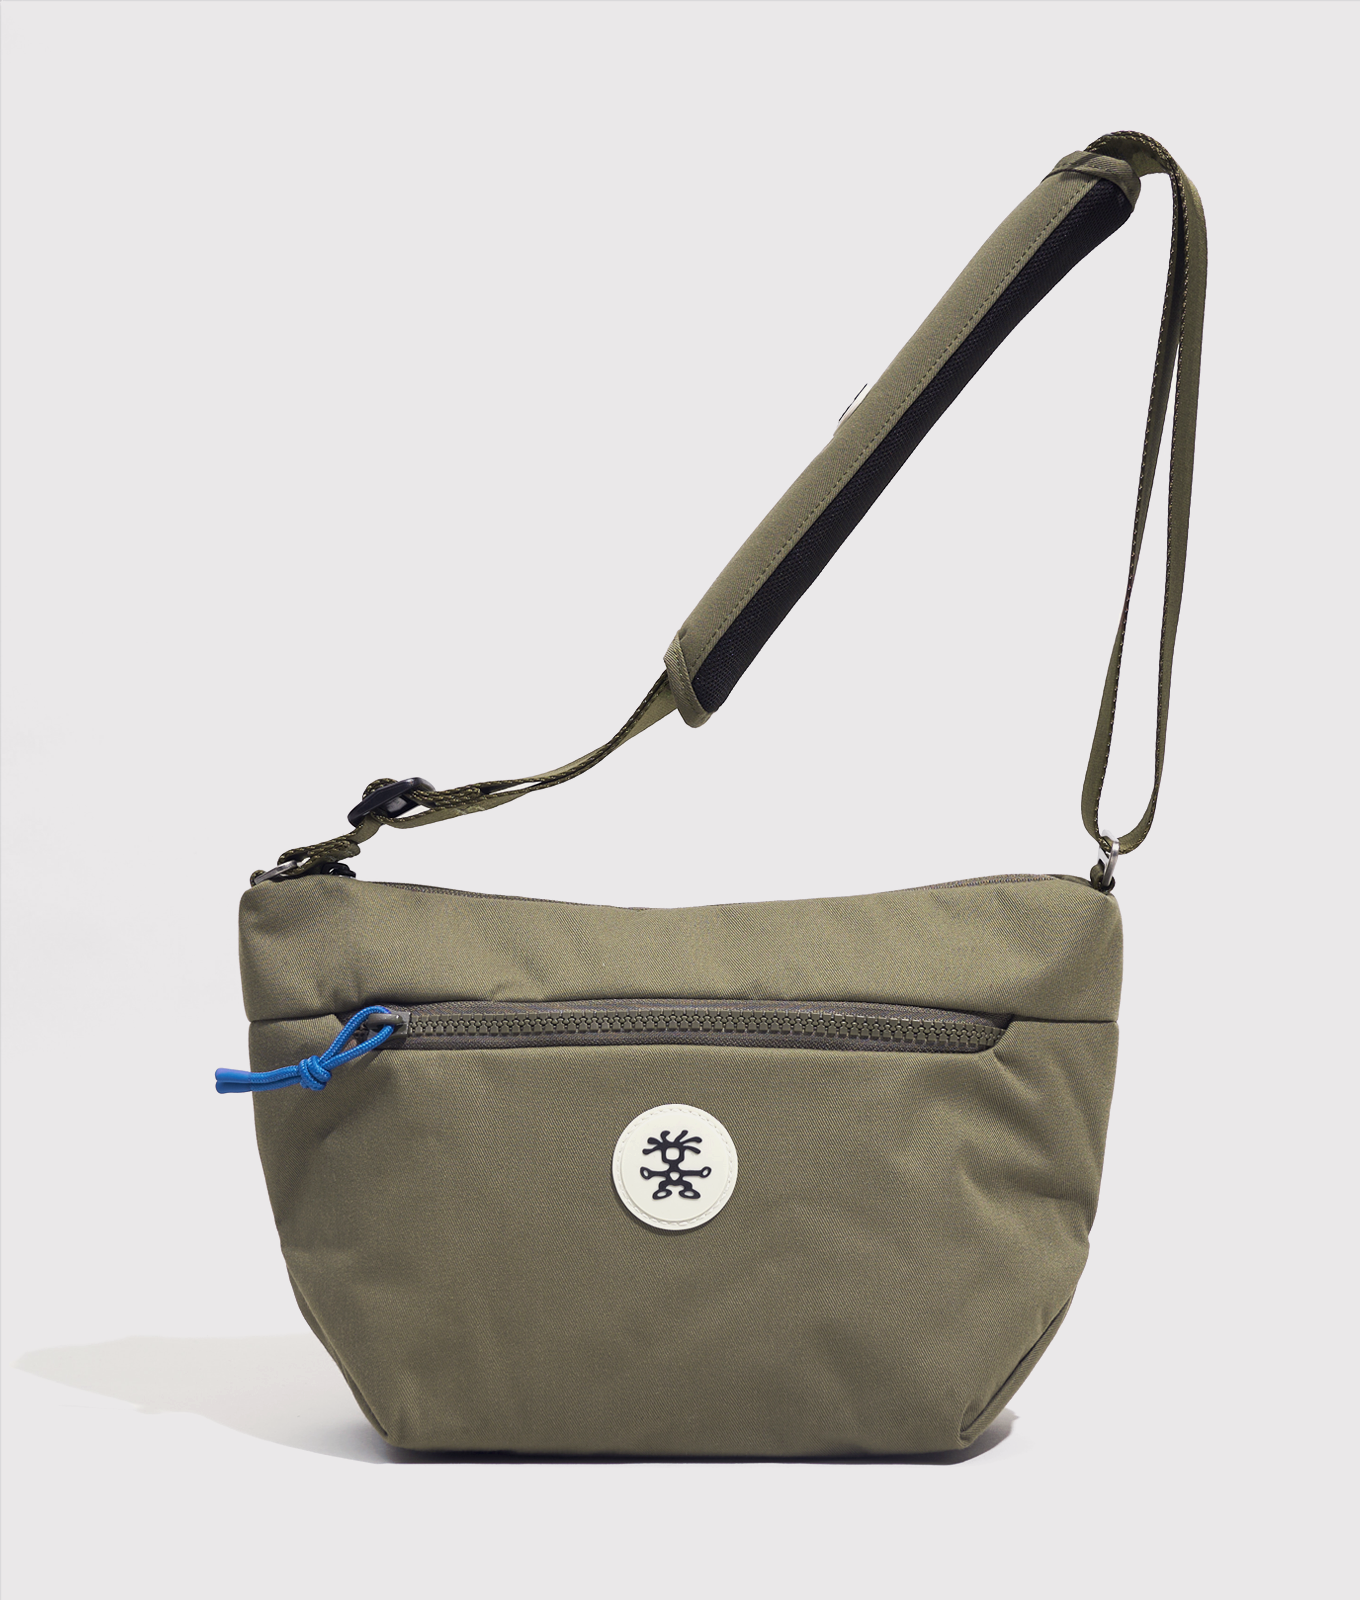 Copy of [Sample Product] Crumpler Considerable Embarrassment Bag - THIS IS  A TEST STORE